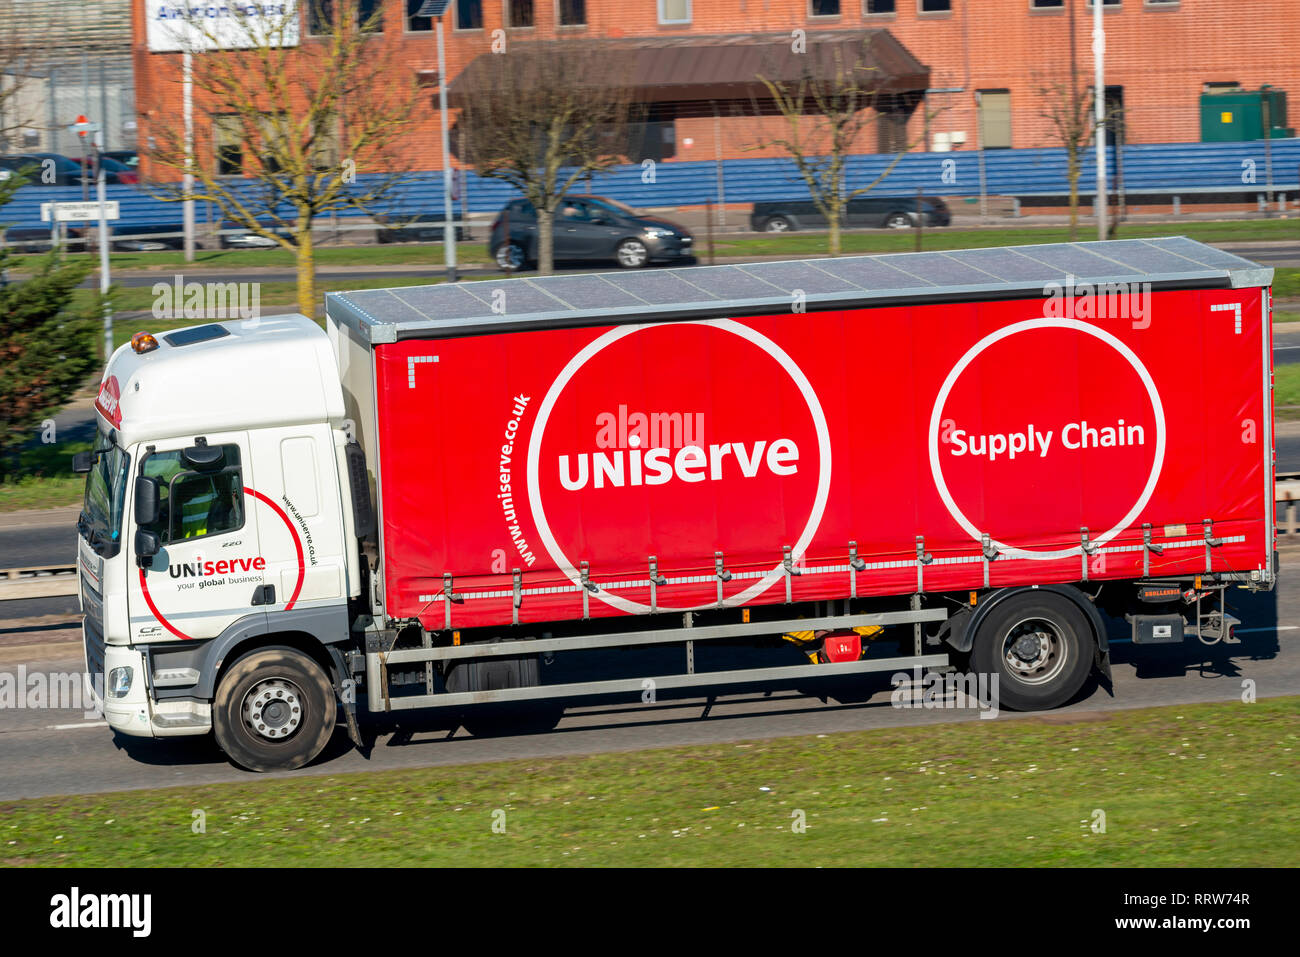 Uniserve supply chain curtain side vehicle. Lorry, truck. Uniserve Group logistics business commercial vehicle. DAF Tautliner, curtainsider with brand Stock Photo